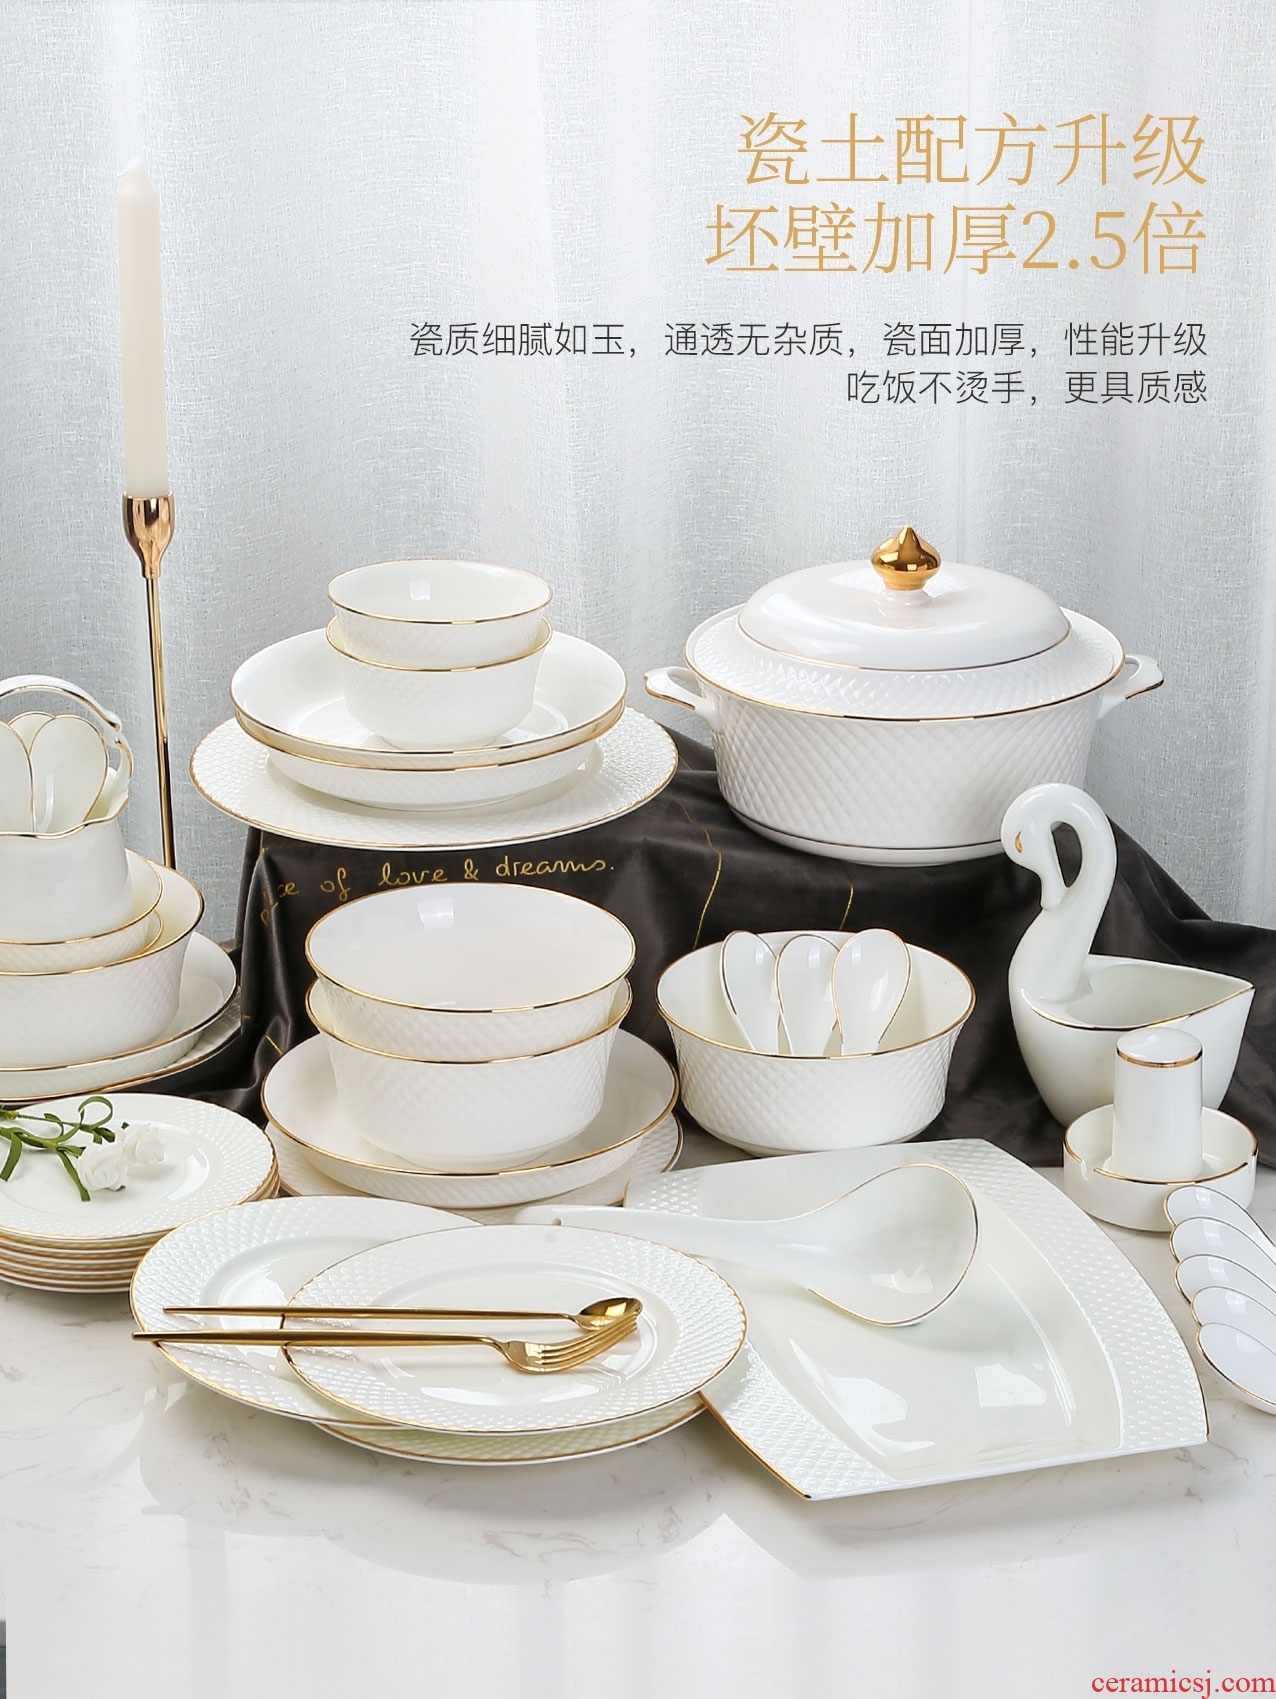 Double 11 opens to booking a European - style jingdezhen ceramic dishes suit household contracted ipads porcelain tableware Jin Ling dishes chopsticks